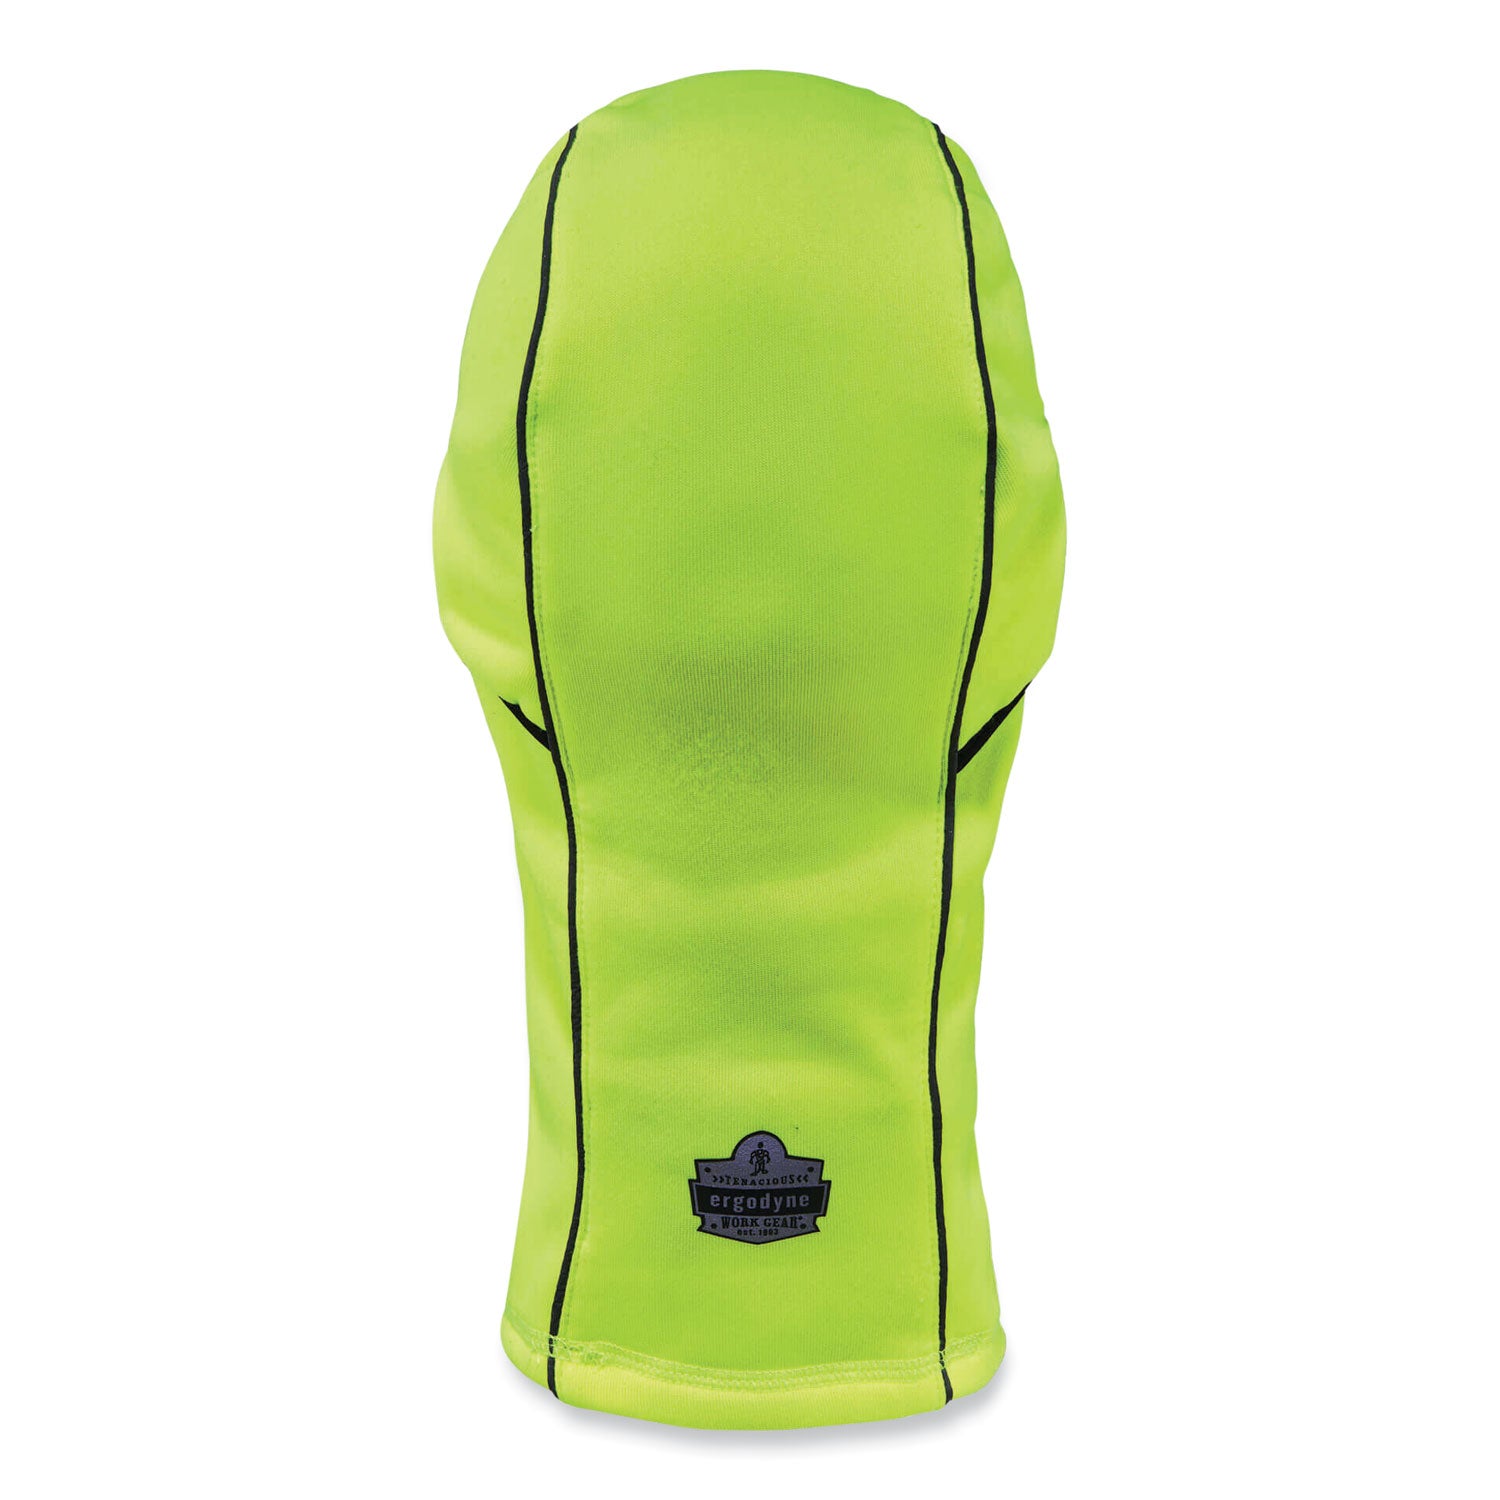 n-ferno-6823-hinged-balaclava-face-mask-fleece-one-size-fits-most-lime-ships-in-1-3-business-days_ego16834 - 2